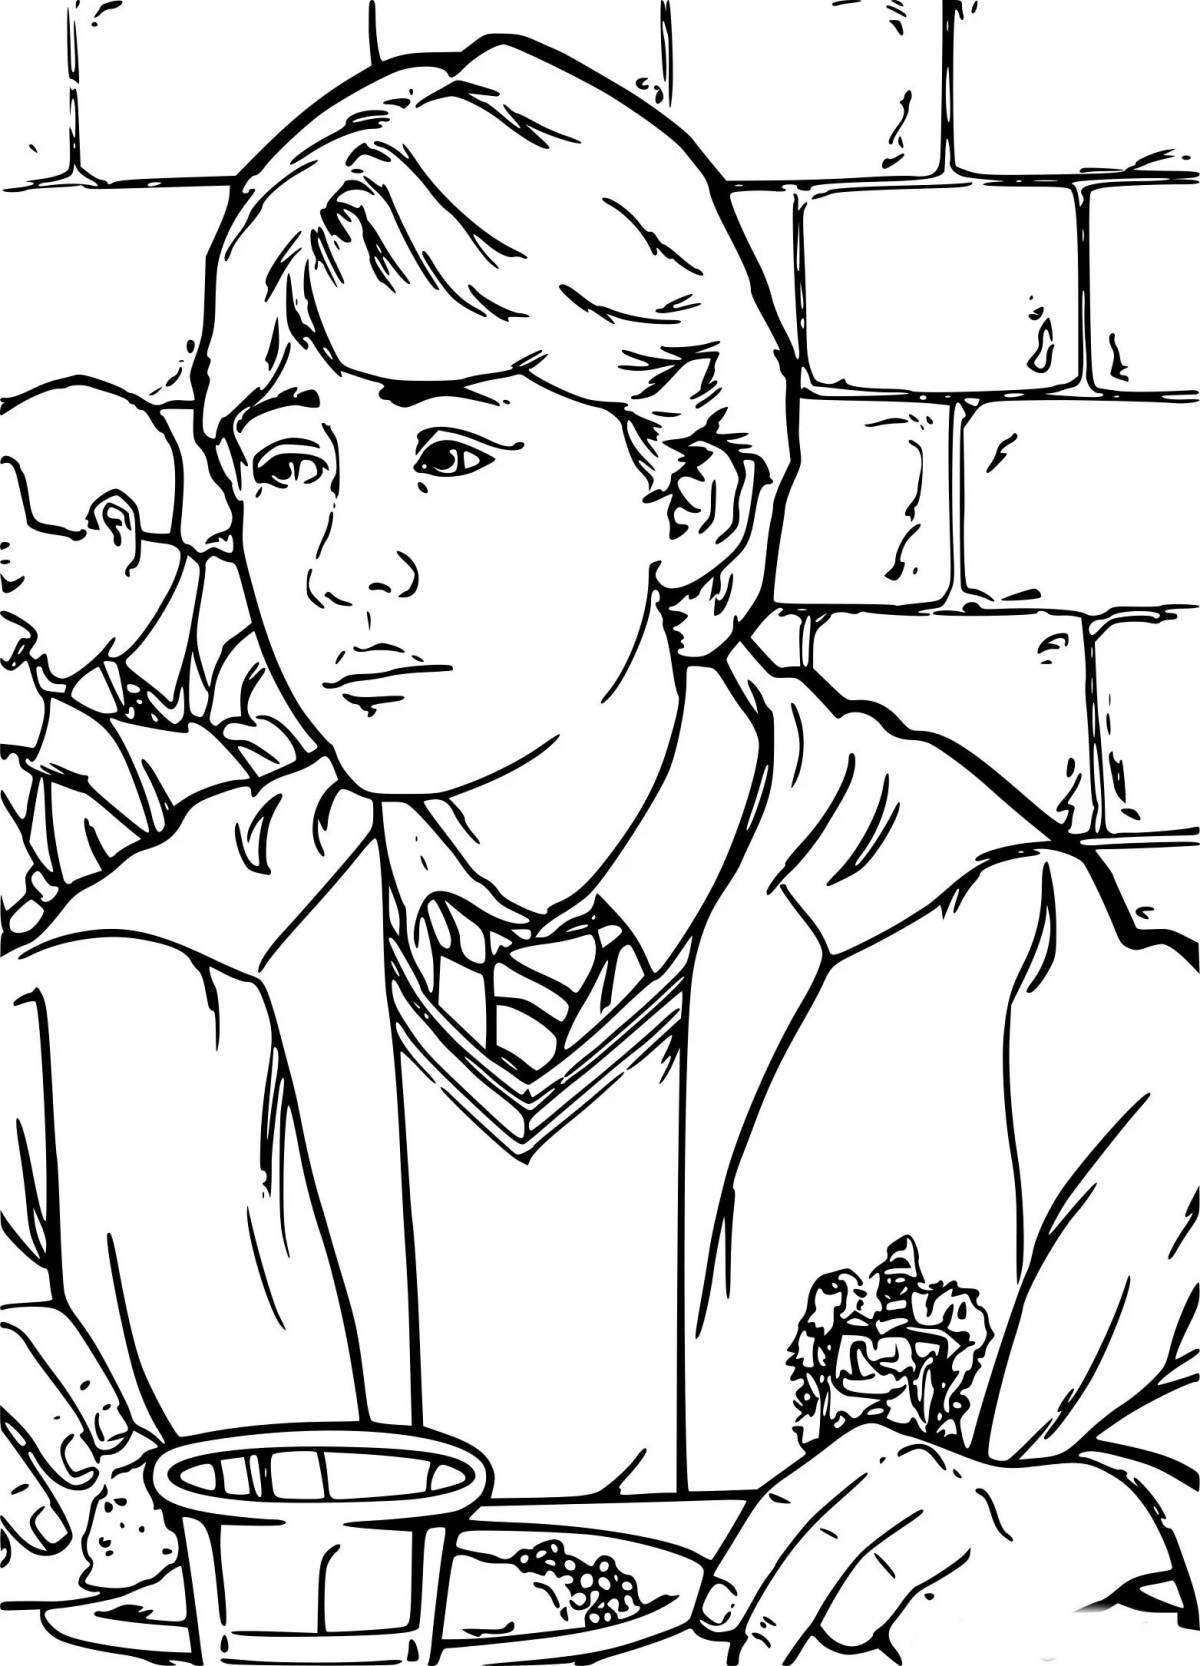 Ron Weasley's funny coloring book